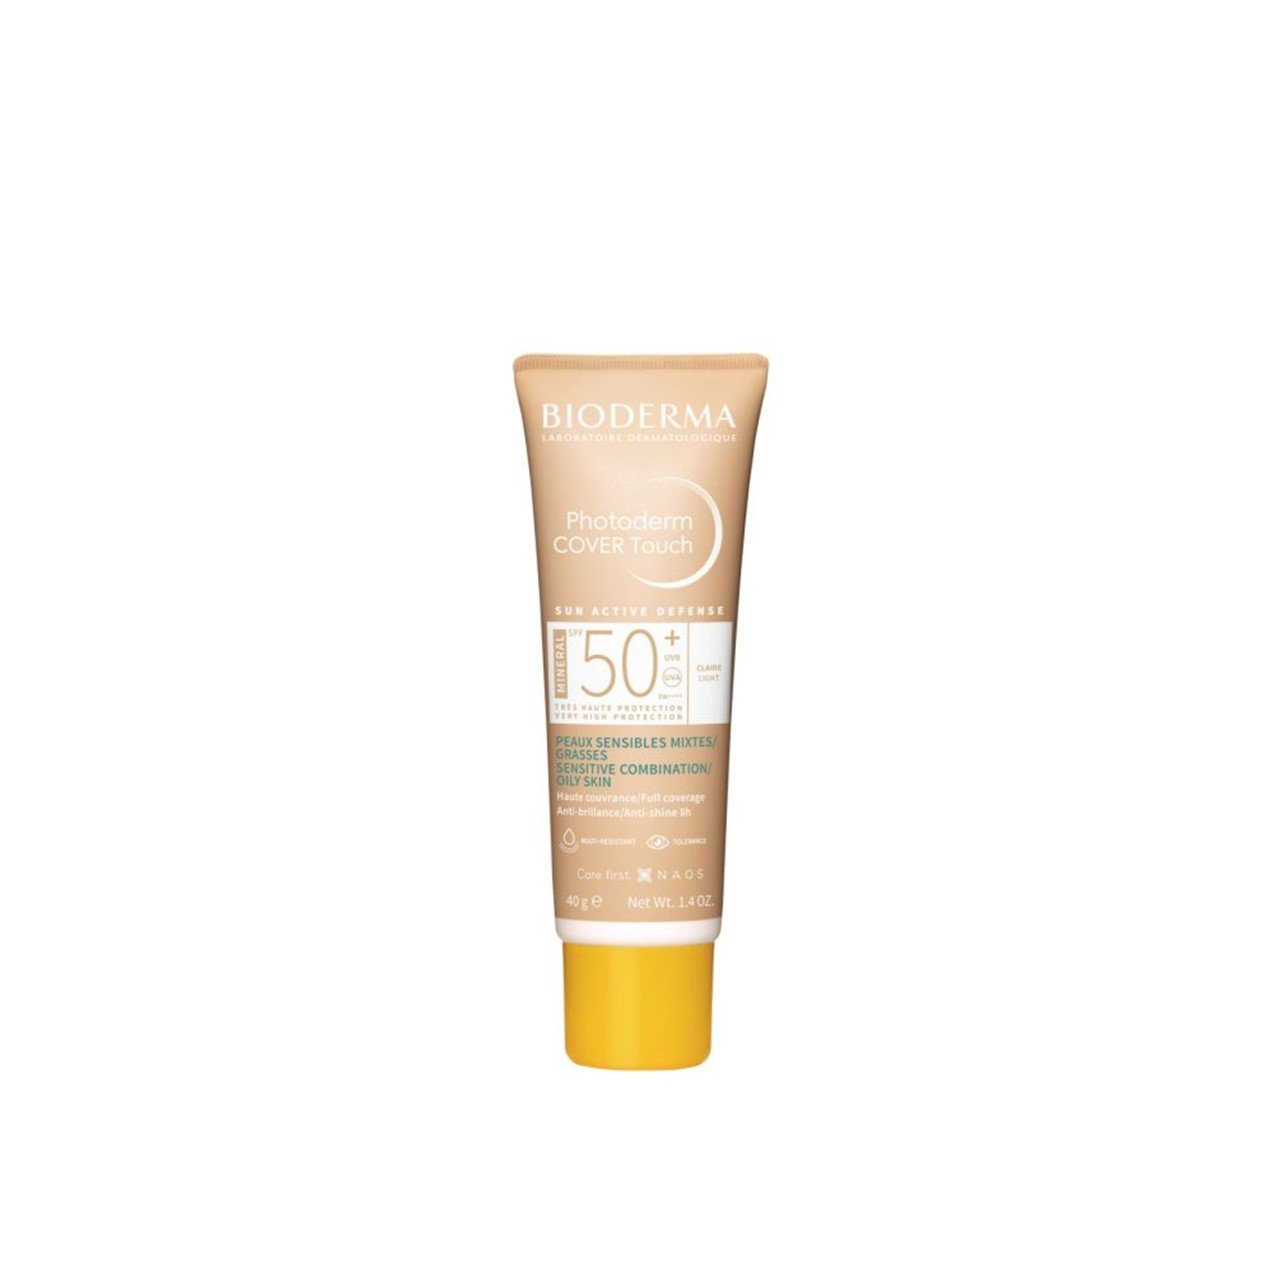 Bioderma Photoderm Cover Touch Mineral SPF50+ Light 40g